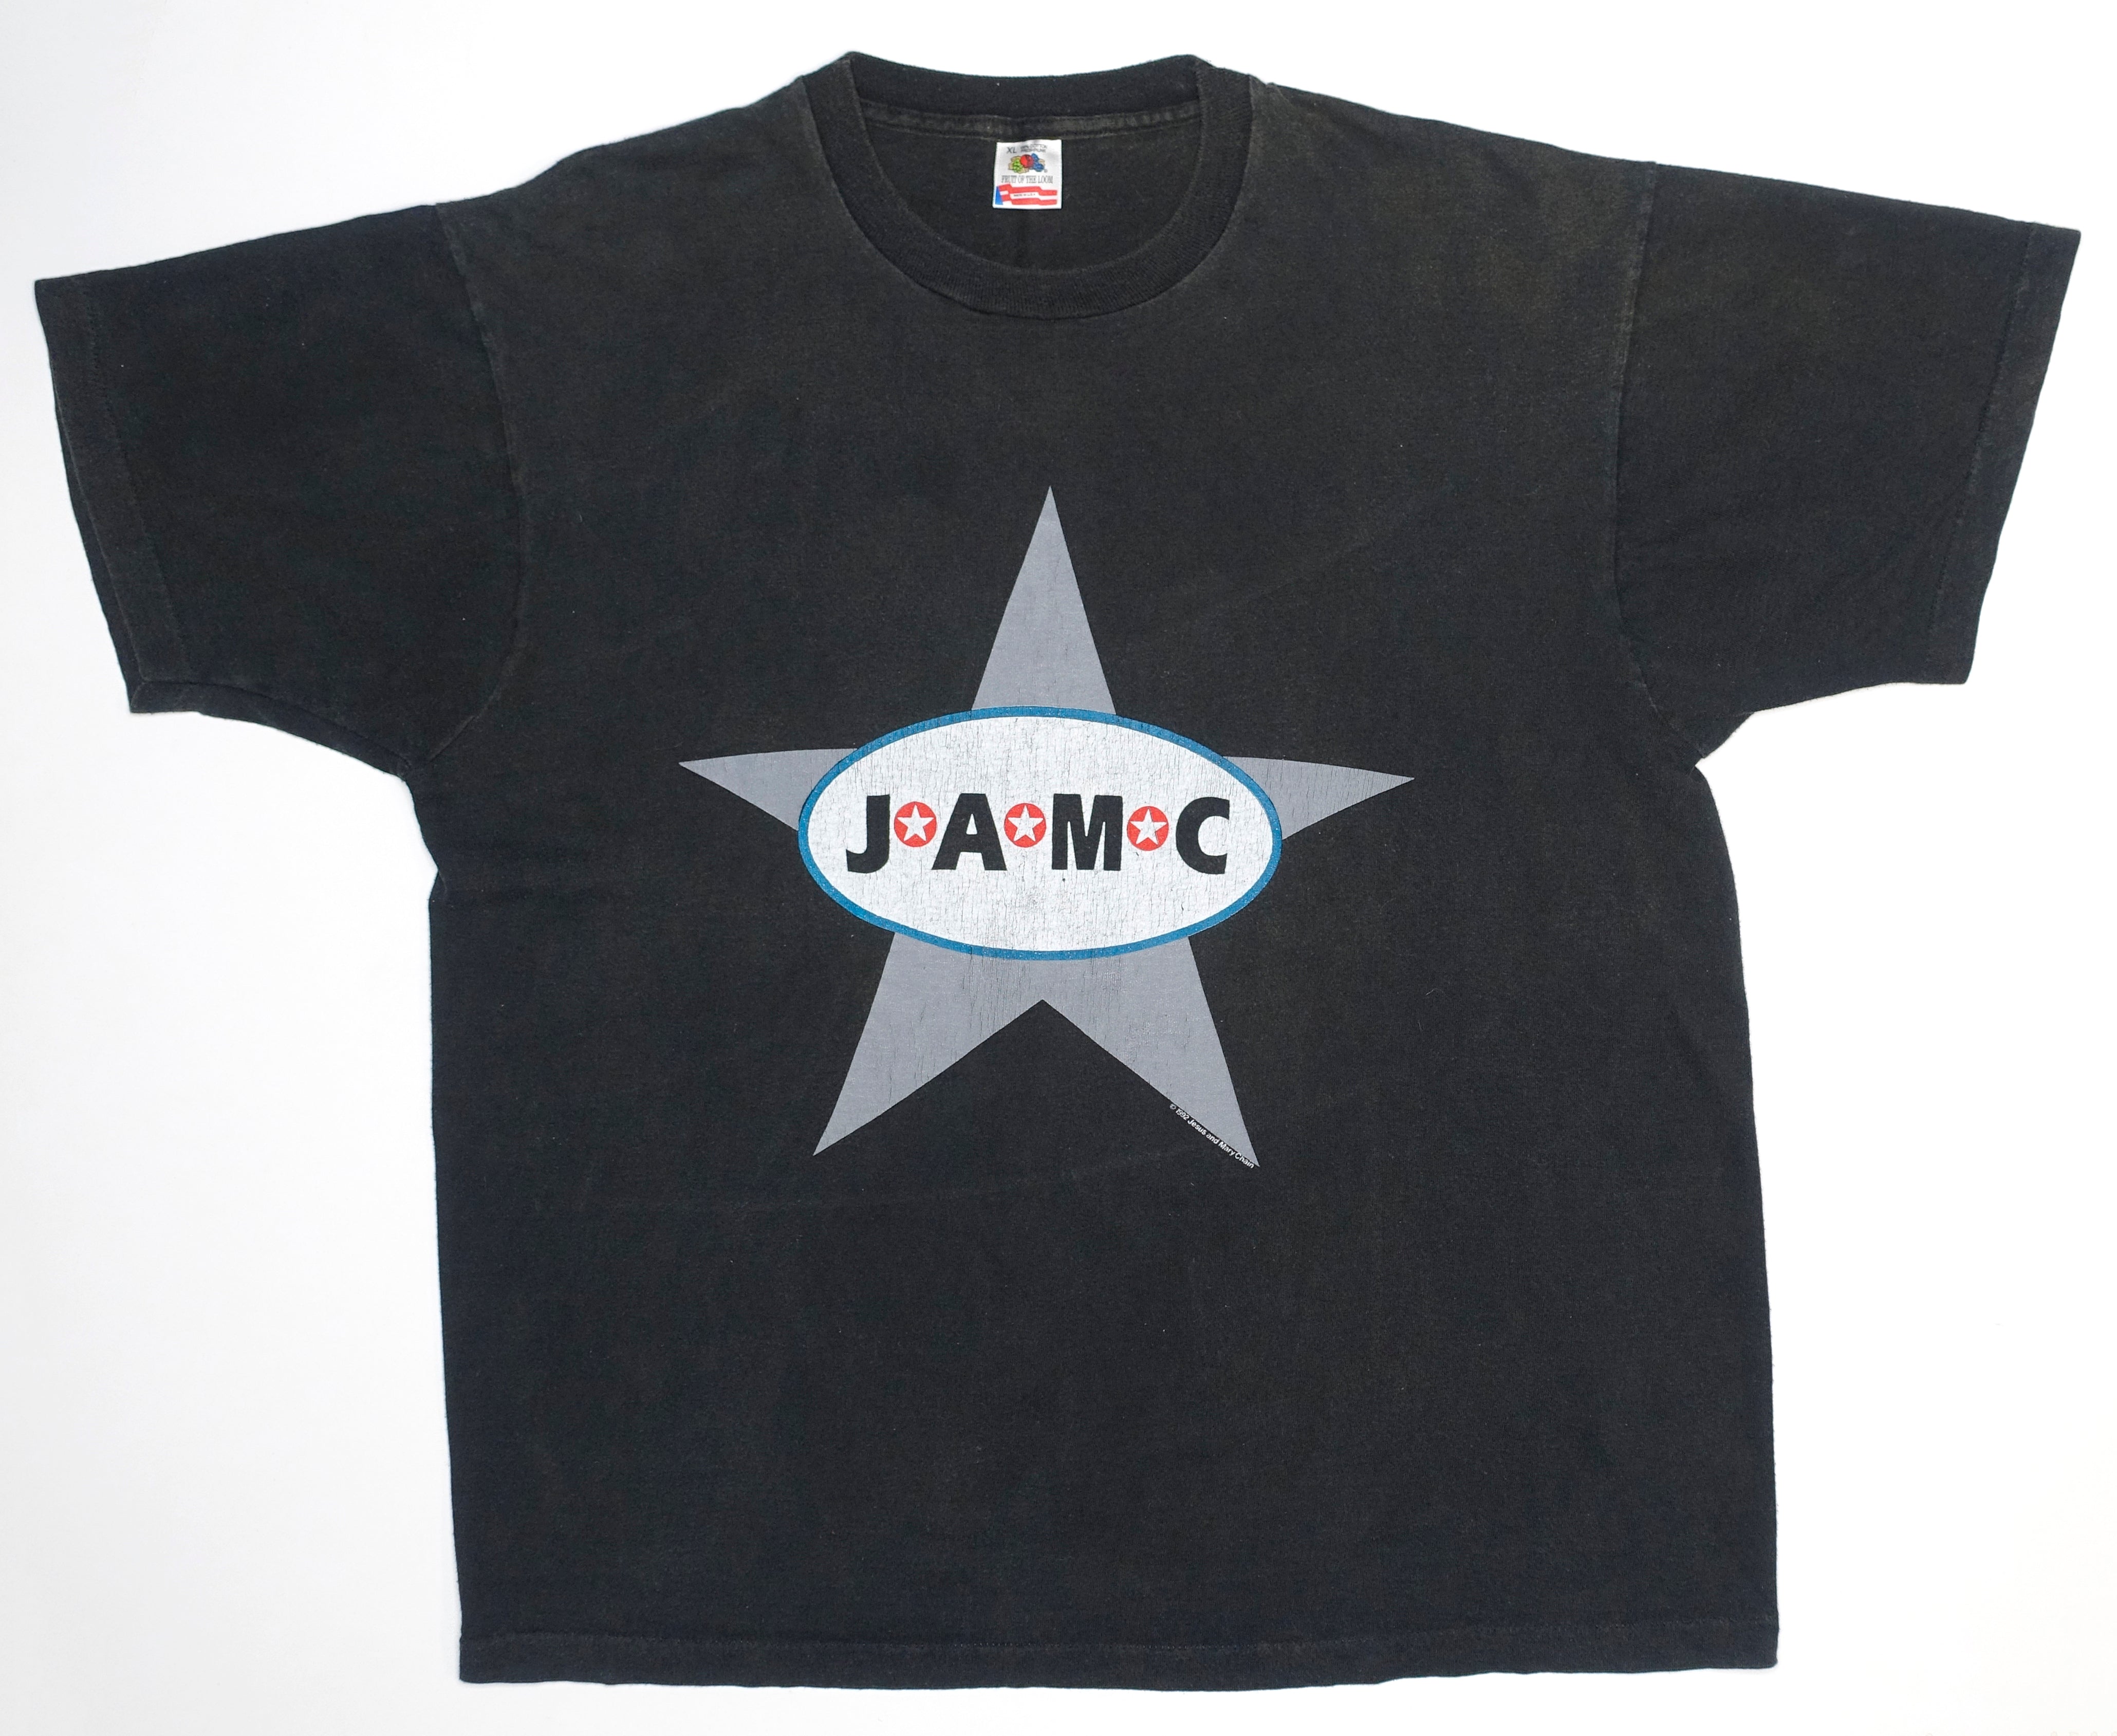 Jesus And Mary Chain - Honey's Dead / JAMC Star 1992 Tour Shirt Size XL